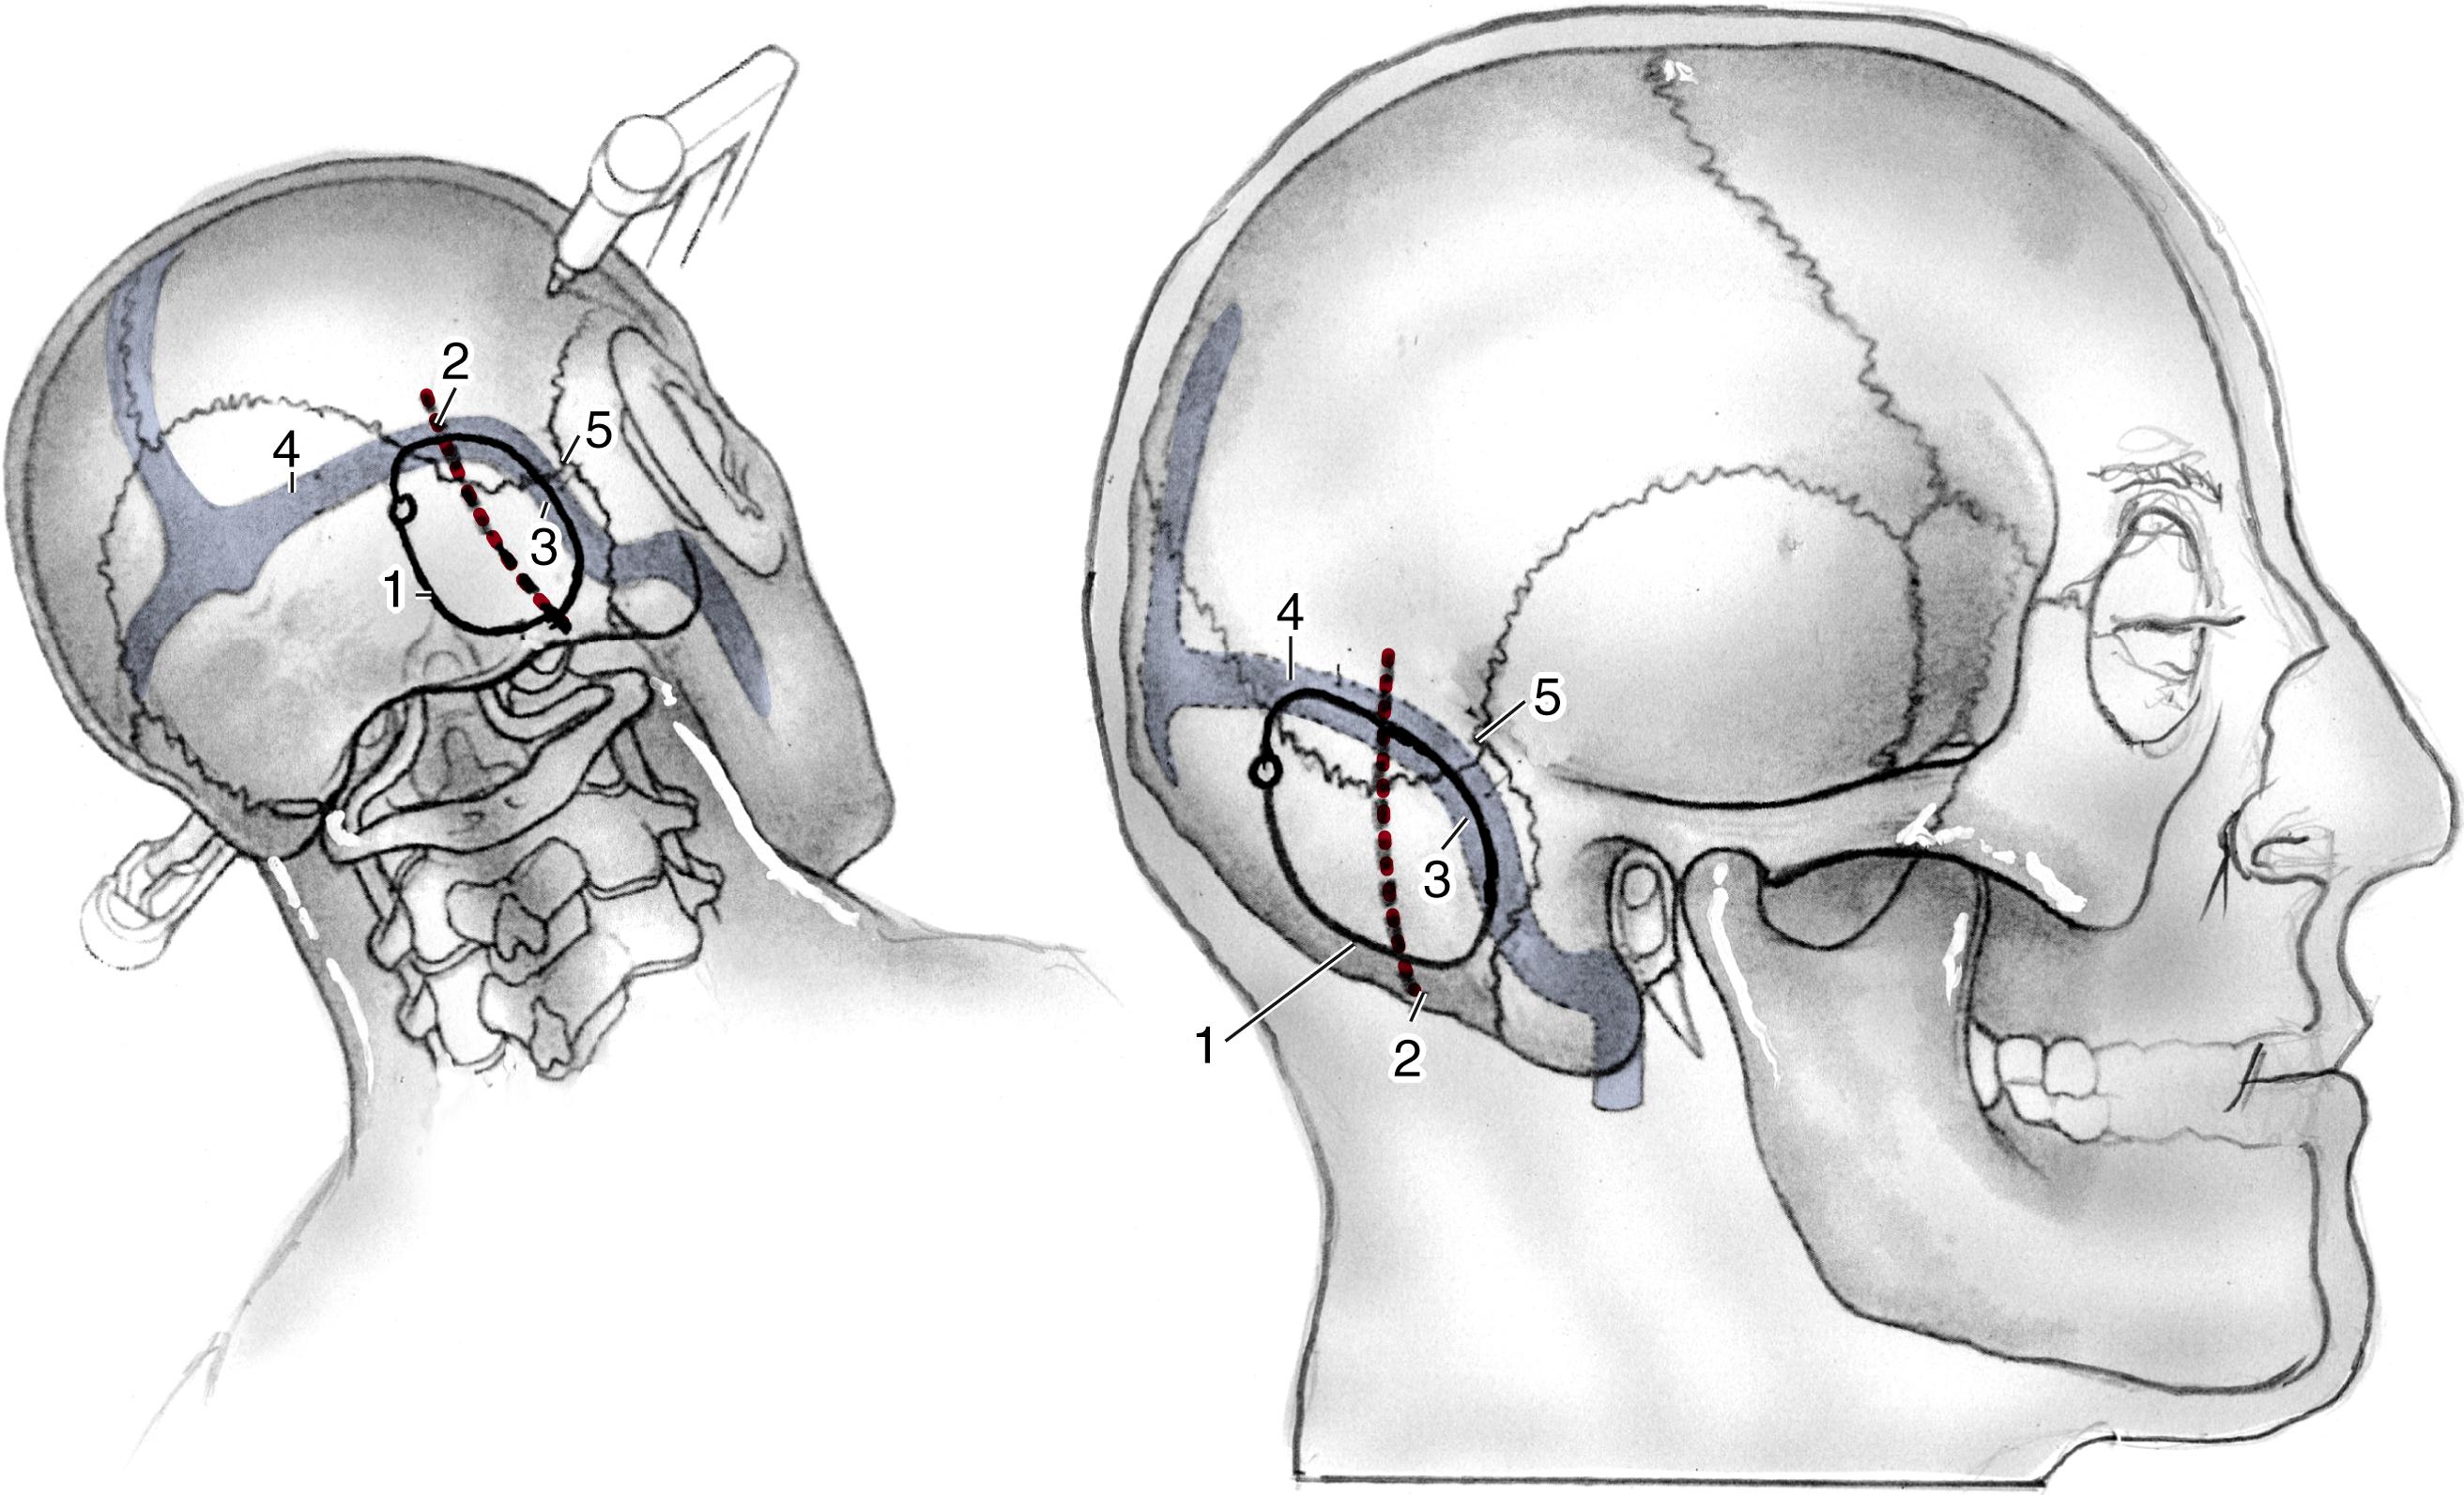 Fig. 45.1, The incision used in the retrosigmoid approach is located approximately 6 cm behind the postauricular sulcus. After craniectomy and retraction of the cerebellum, the tumor becomes visible within the cerebellopontine angle. The anterior edge of the craniotomy is placed immediately behind the sigmoid sinus and just inferiorly to the lower margin of the transverse sinus. 1 , Craniotomy outline; 2 , skin incision; 3 , sigmoid sinus; 4 , transverse sinus; 5 , asterion.